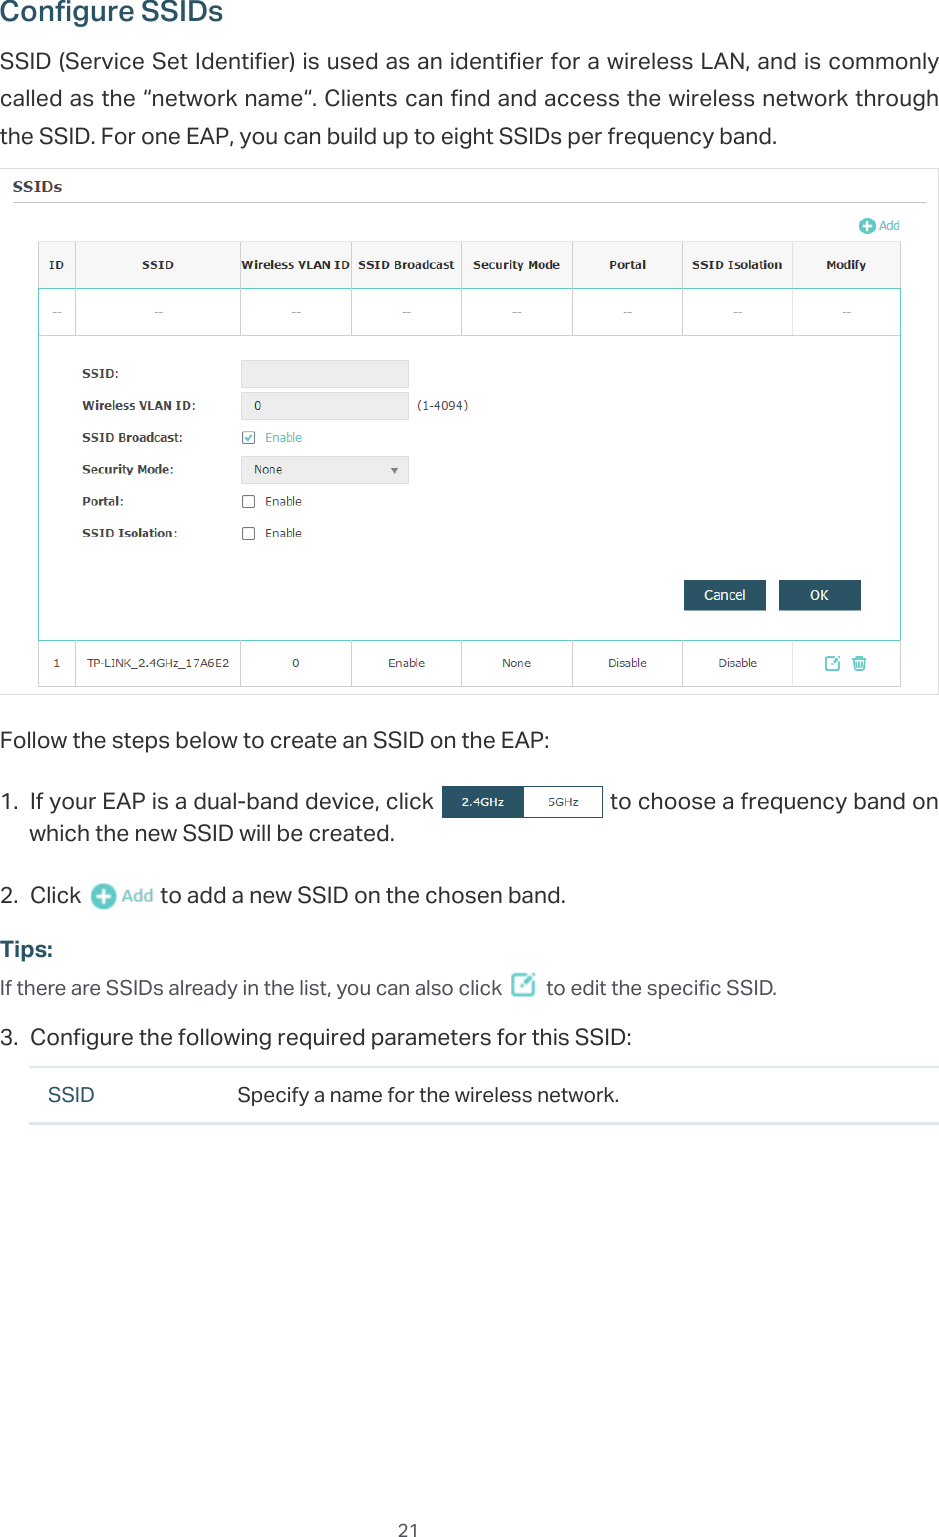  21Configure SSIDsSSID (Service Set Identifier) is used as an identifier for a wireless LAN, and is commonly called as the “network name“. Clients can find and access the wireless network through the SSID. For one EAP, you can build up to eight SSIDs per frequency band.Follow the steps below to create an SSID on the EAP:1. If your EAP is a dual-band device, click   to choose a frequency band on which the new SSID will be created.2. Click   to add a new SSID on the chosen band.Tips:If there are SSIDs already in the list, you can also click   to edit the specific SSID.3. Configure the following required parameters for this SSID:SSID Specify a name for the wireless network.